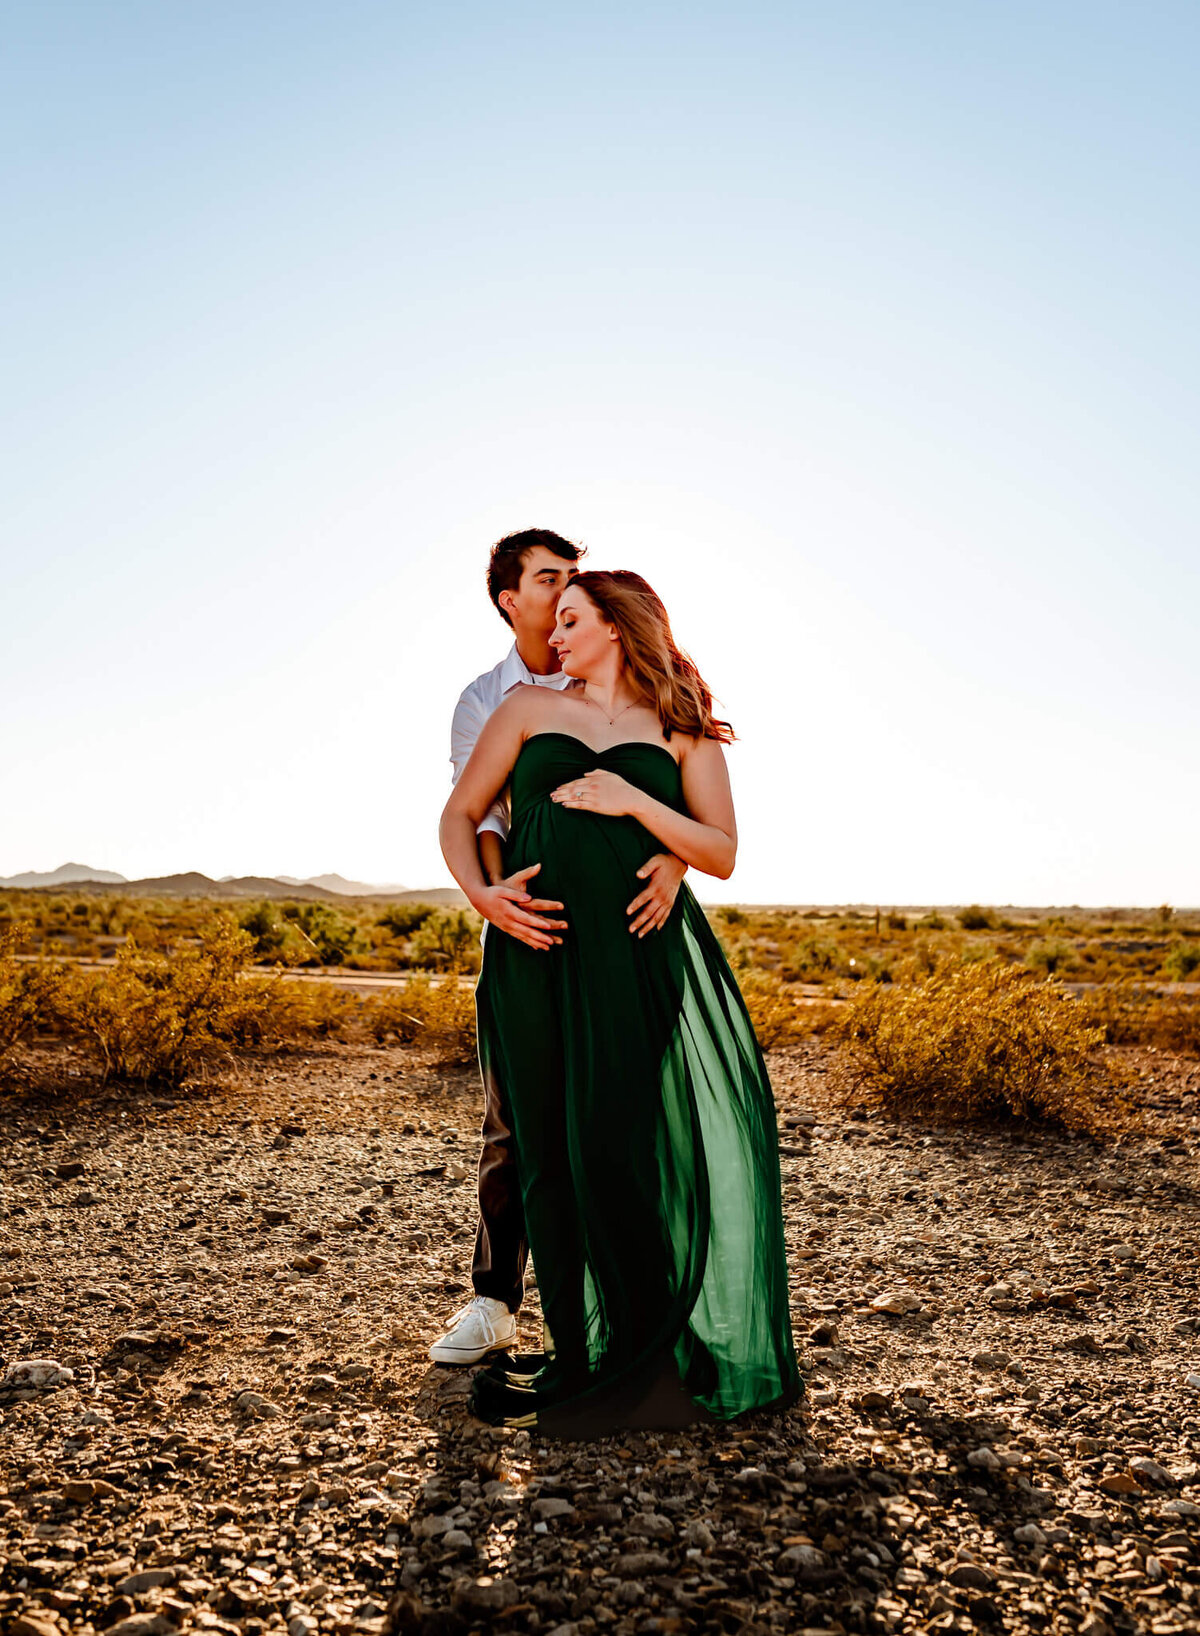 husband hugging wife and baby bump from behind during maternity session with Cactus & Pine Photography LLC in Arizona